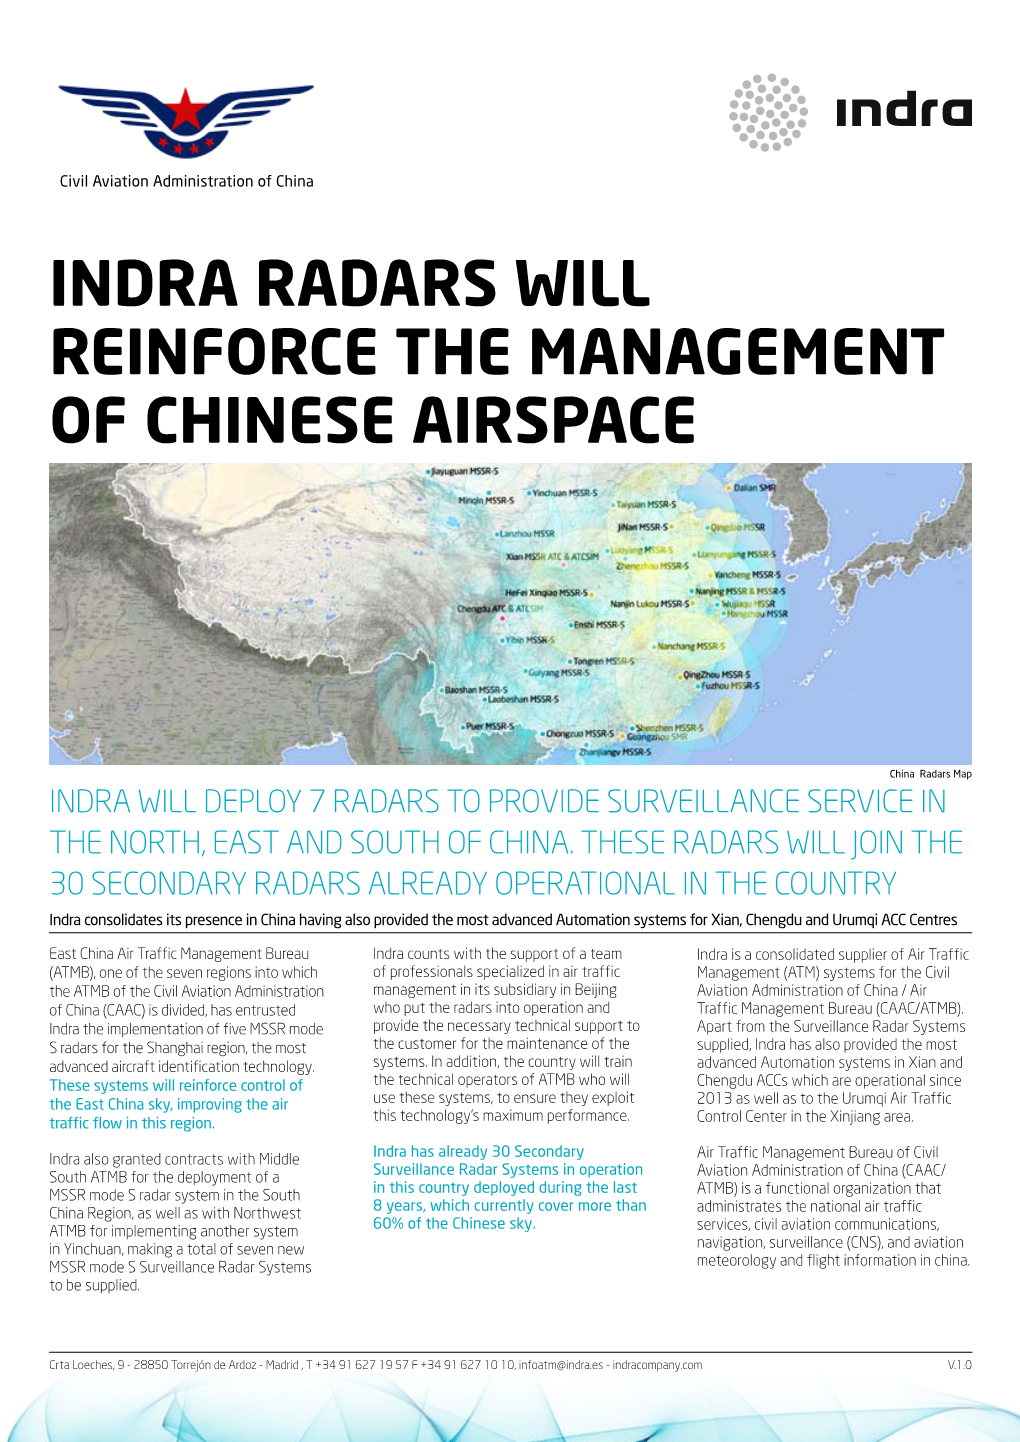 Indra Radars Will Reinforce the Management of Chinese Airspace